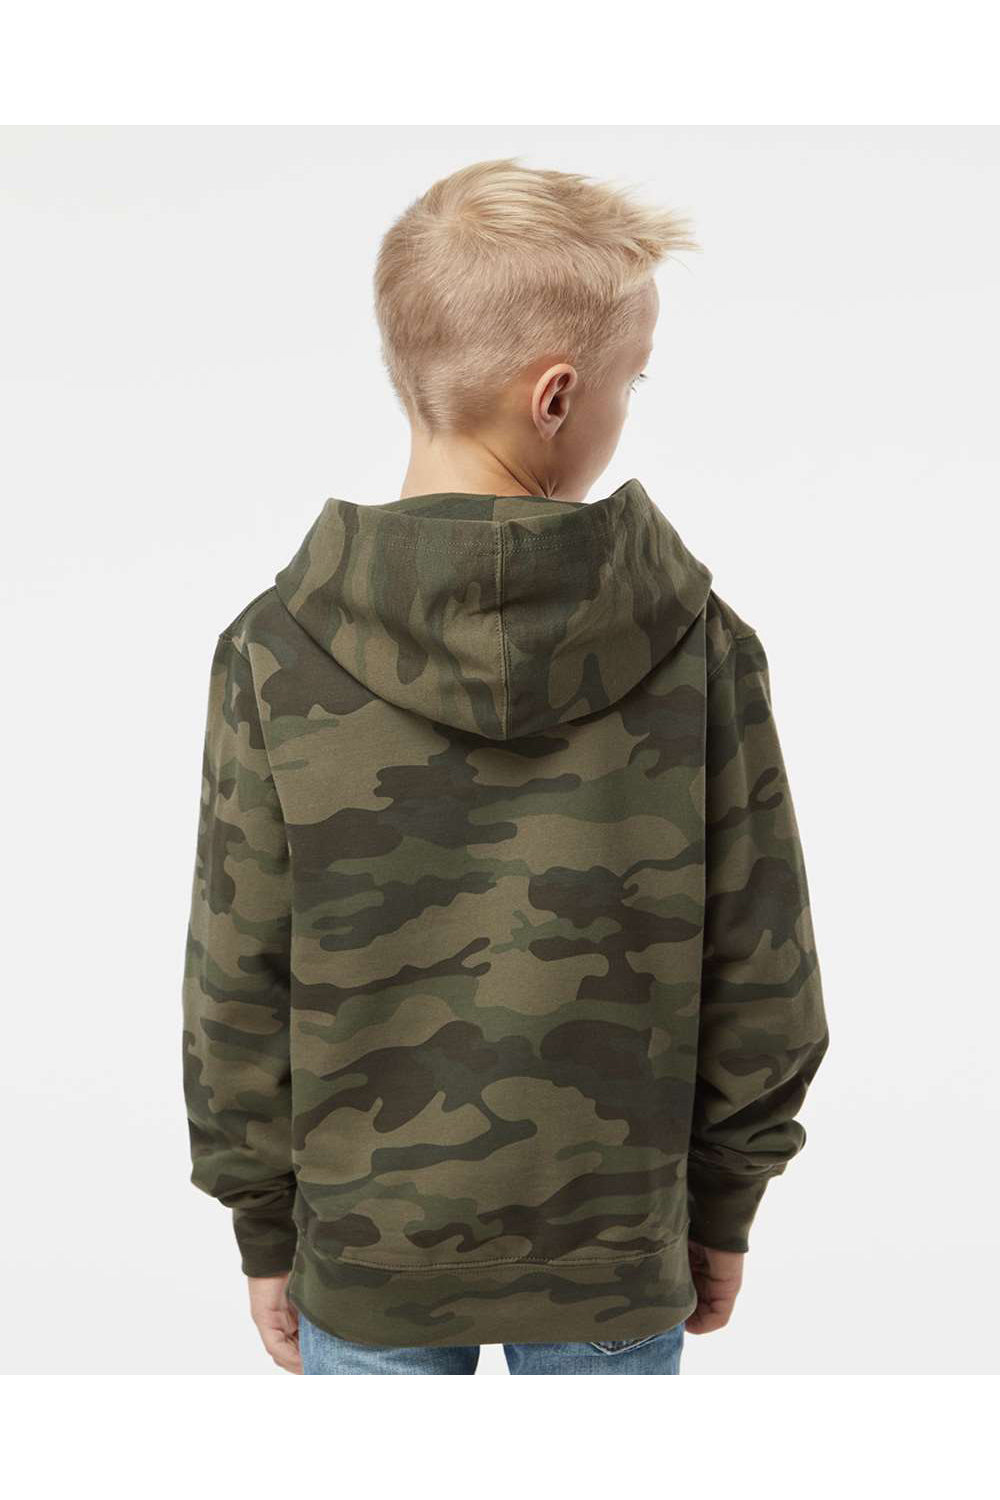 Independent Trading Co. SS4001Y Youth Hooded Sweatshirt Hoodie Forest Green Camo Model Back